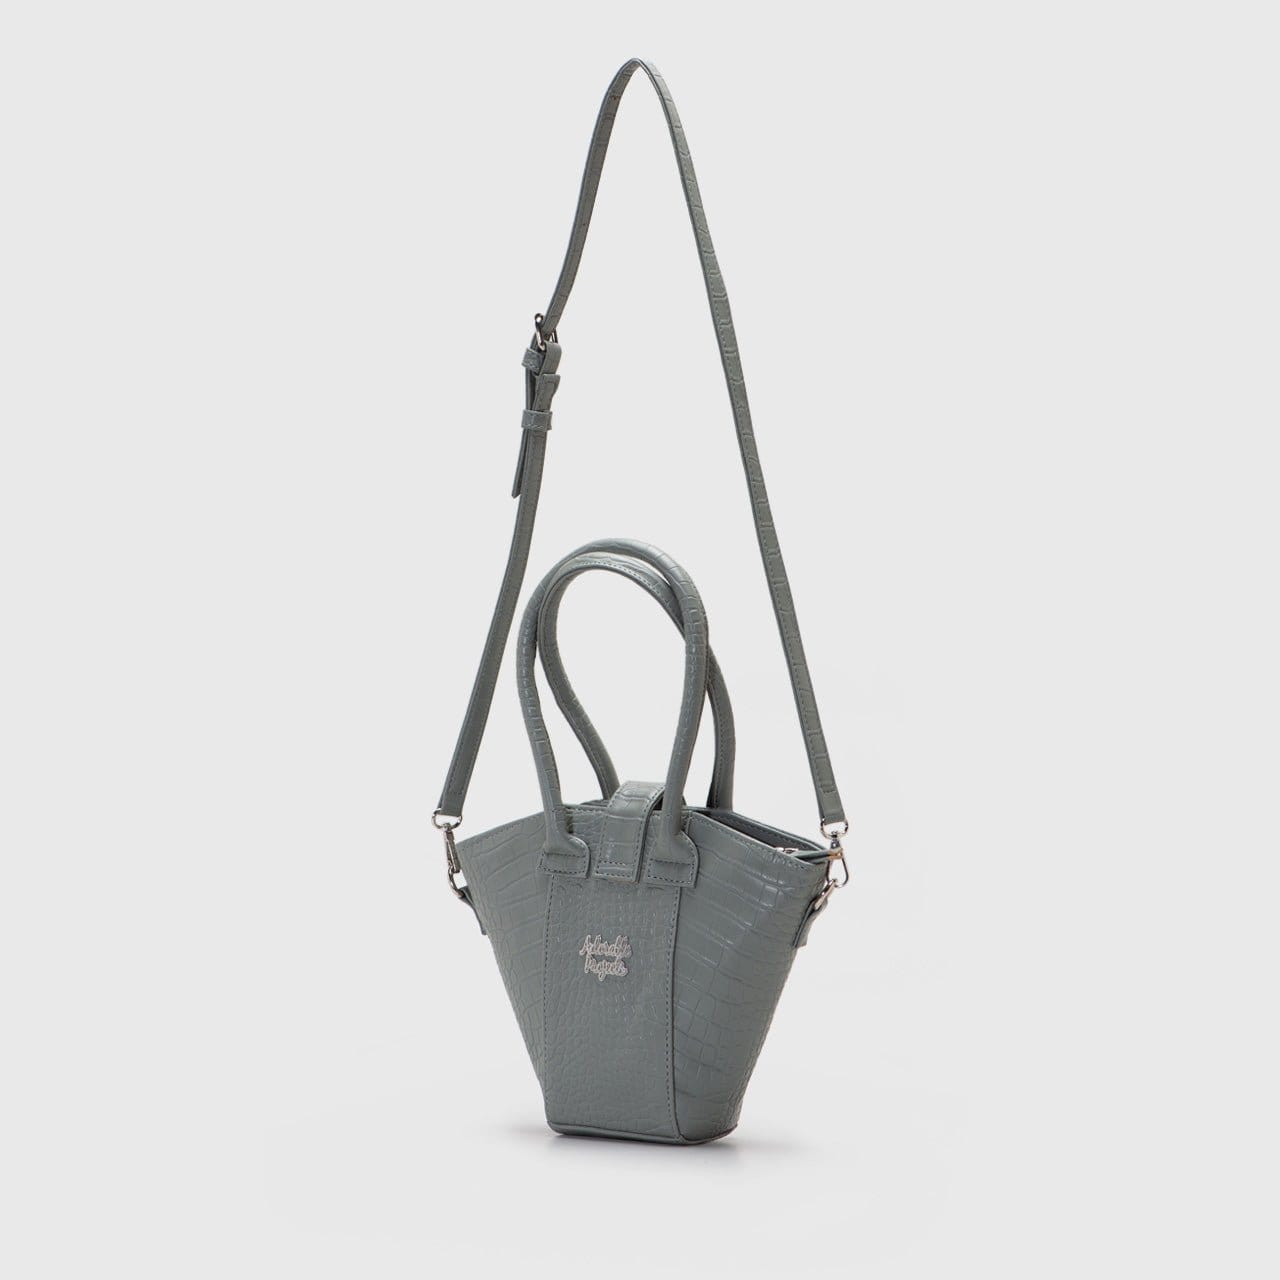 Adorable Projects Selan Sling Bag Grey